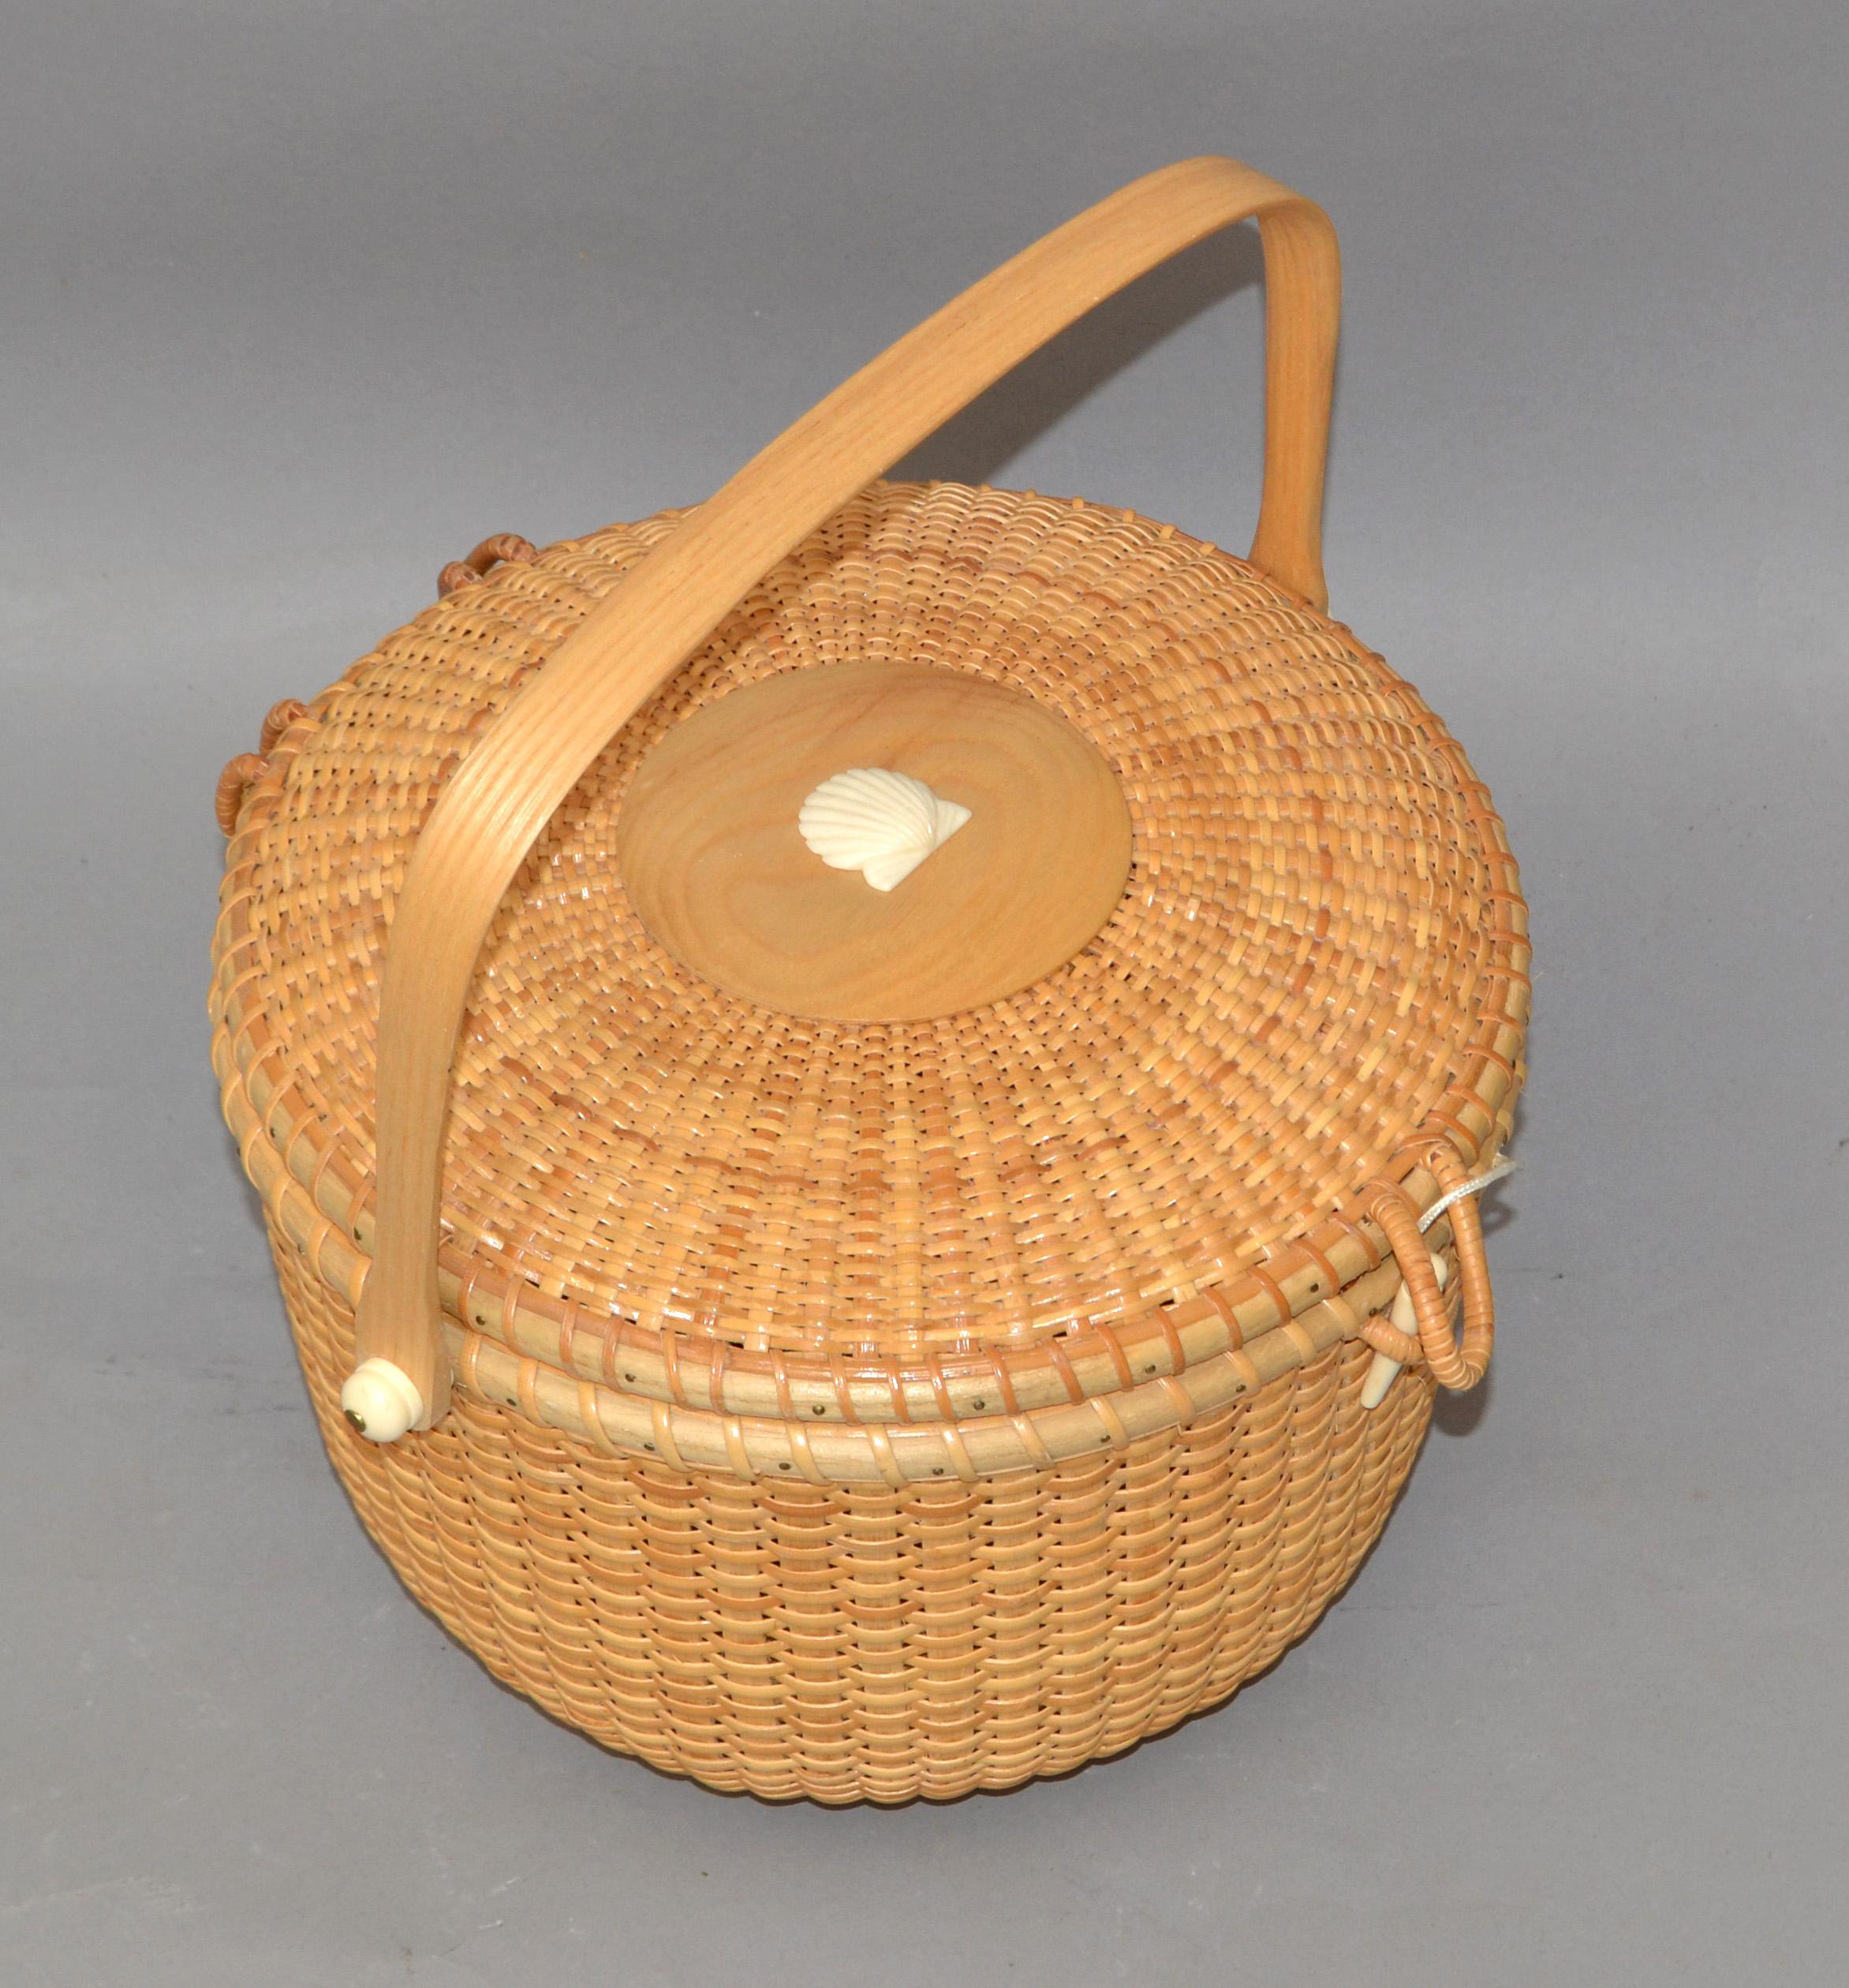 Vintage Coastal Folk Art lidded round basket handmade Bamboo and handwoven Rattan in blonde and white Plastik Seashell decoration. 
Nautical Bohemian Chic Design for Your bathroom, sunroom or as Centerpiece on a table setting.